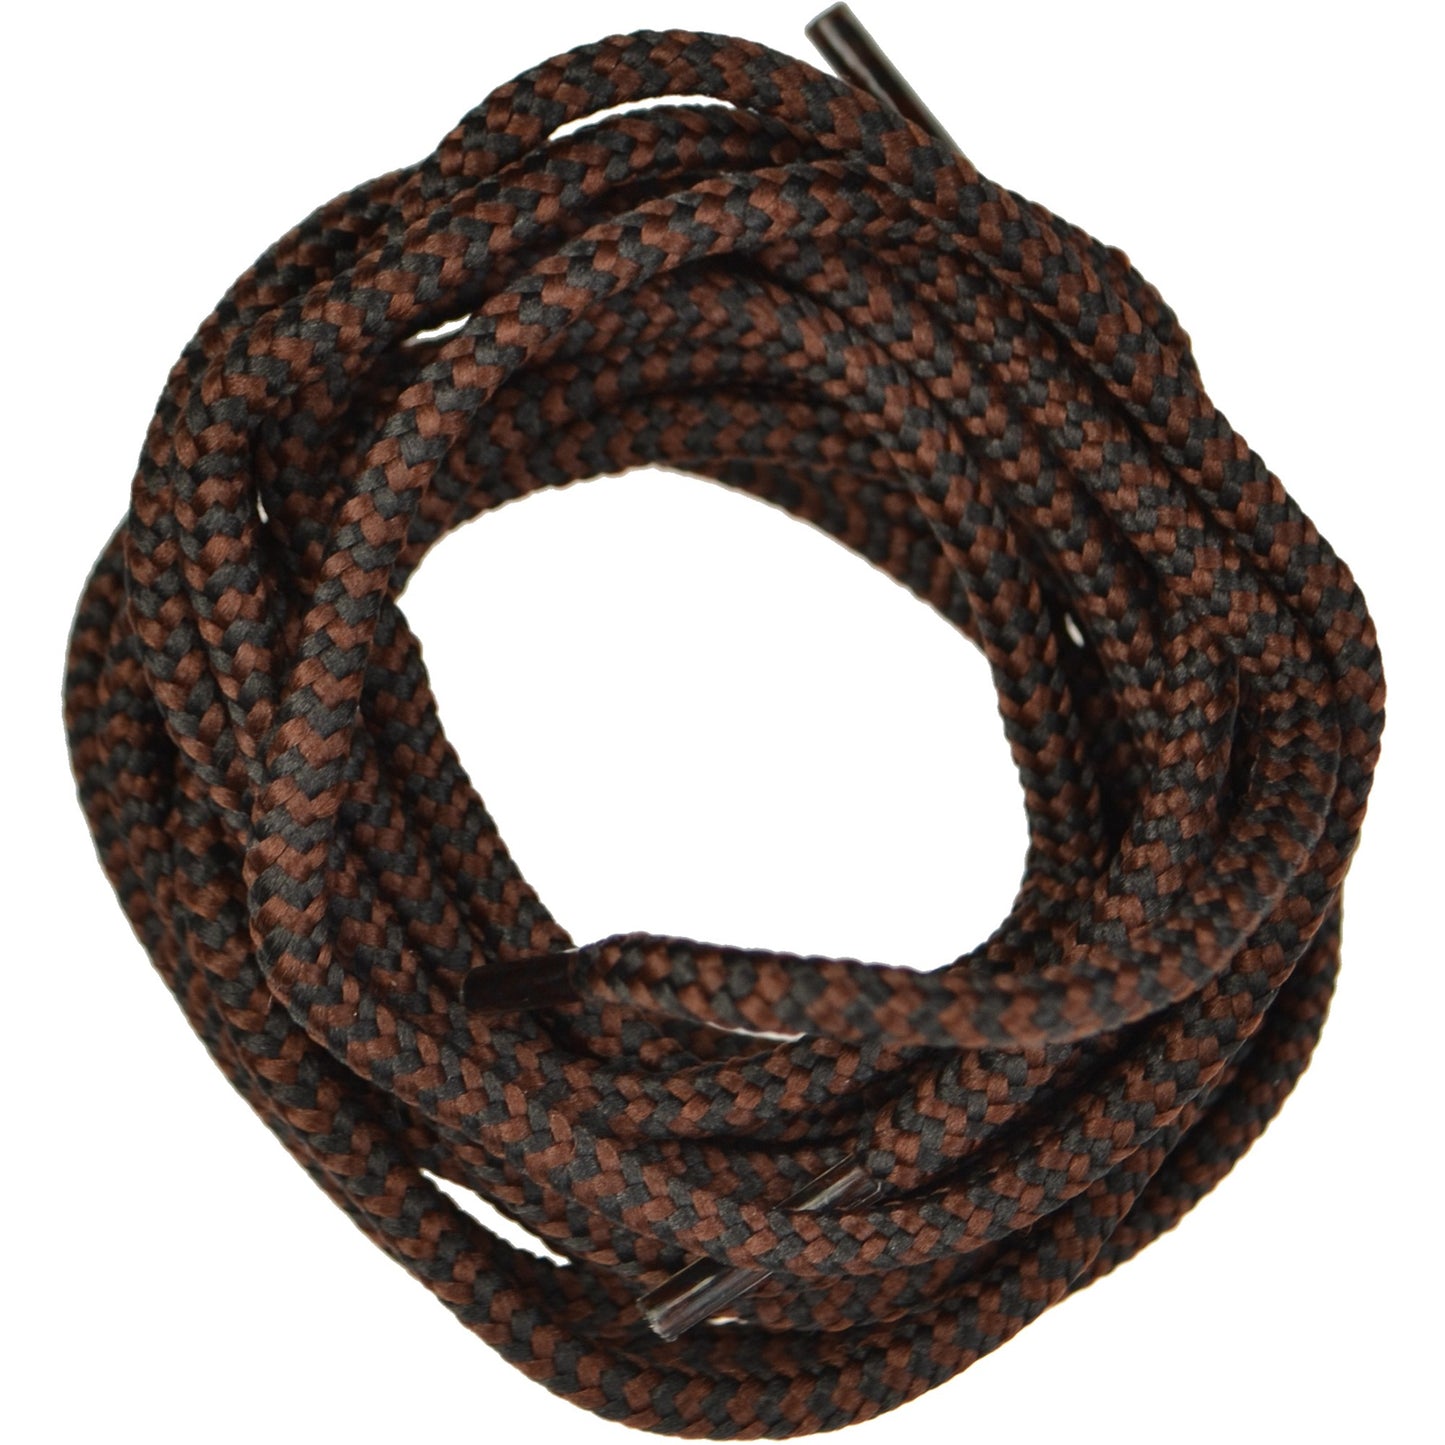 150cm Black & brown dog-tooth walking boot Laces